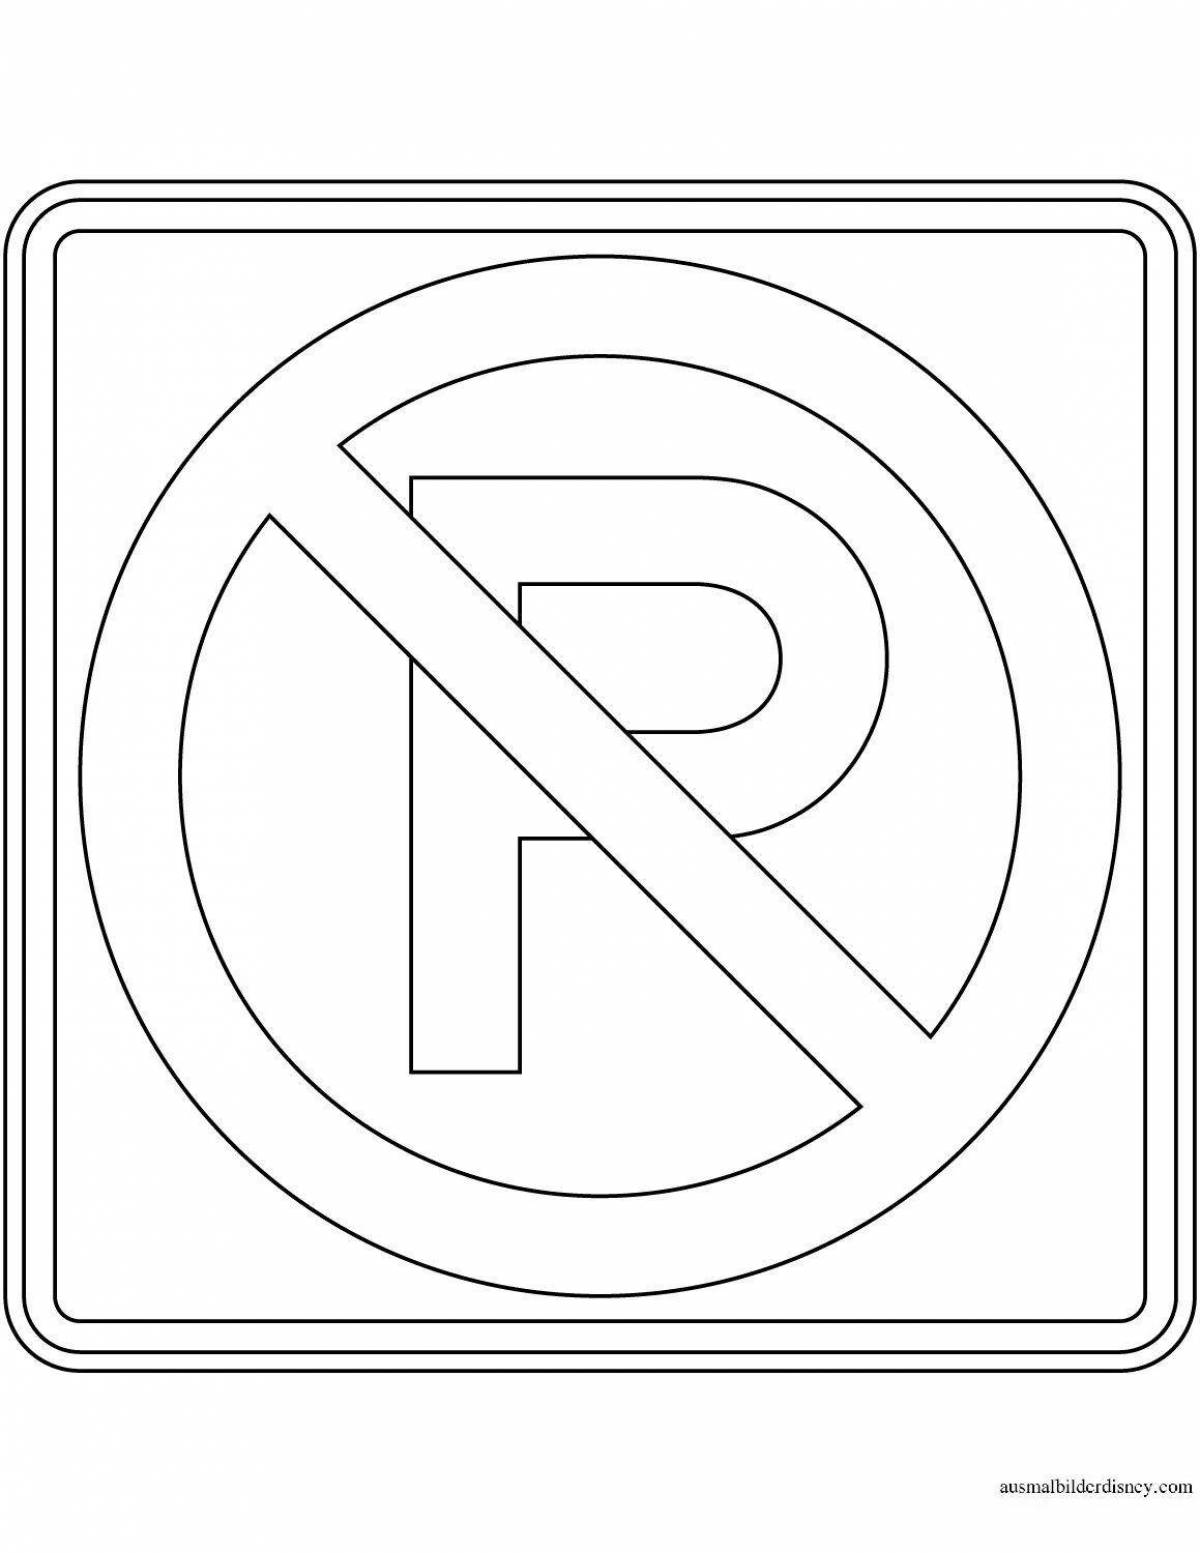 Coloring page dazzling road sign